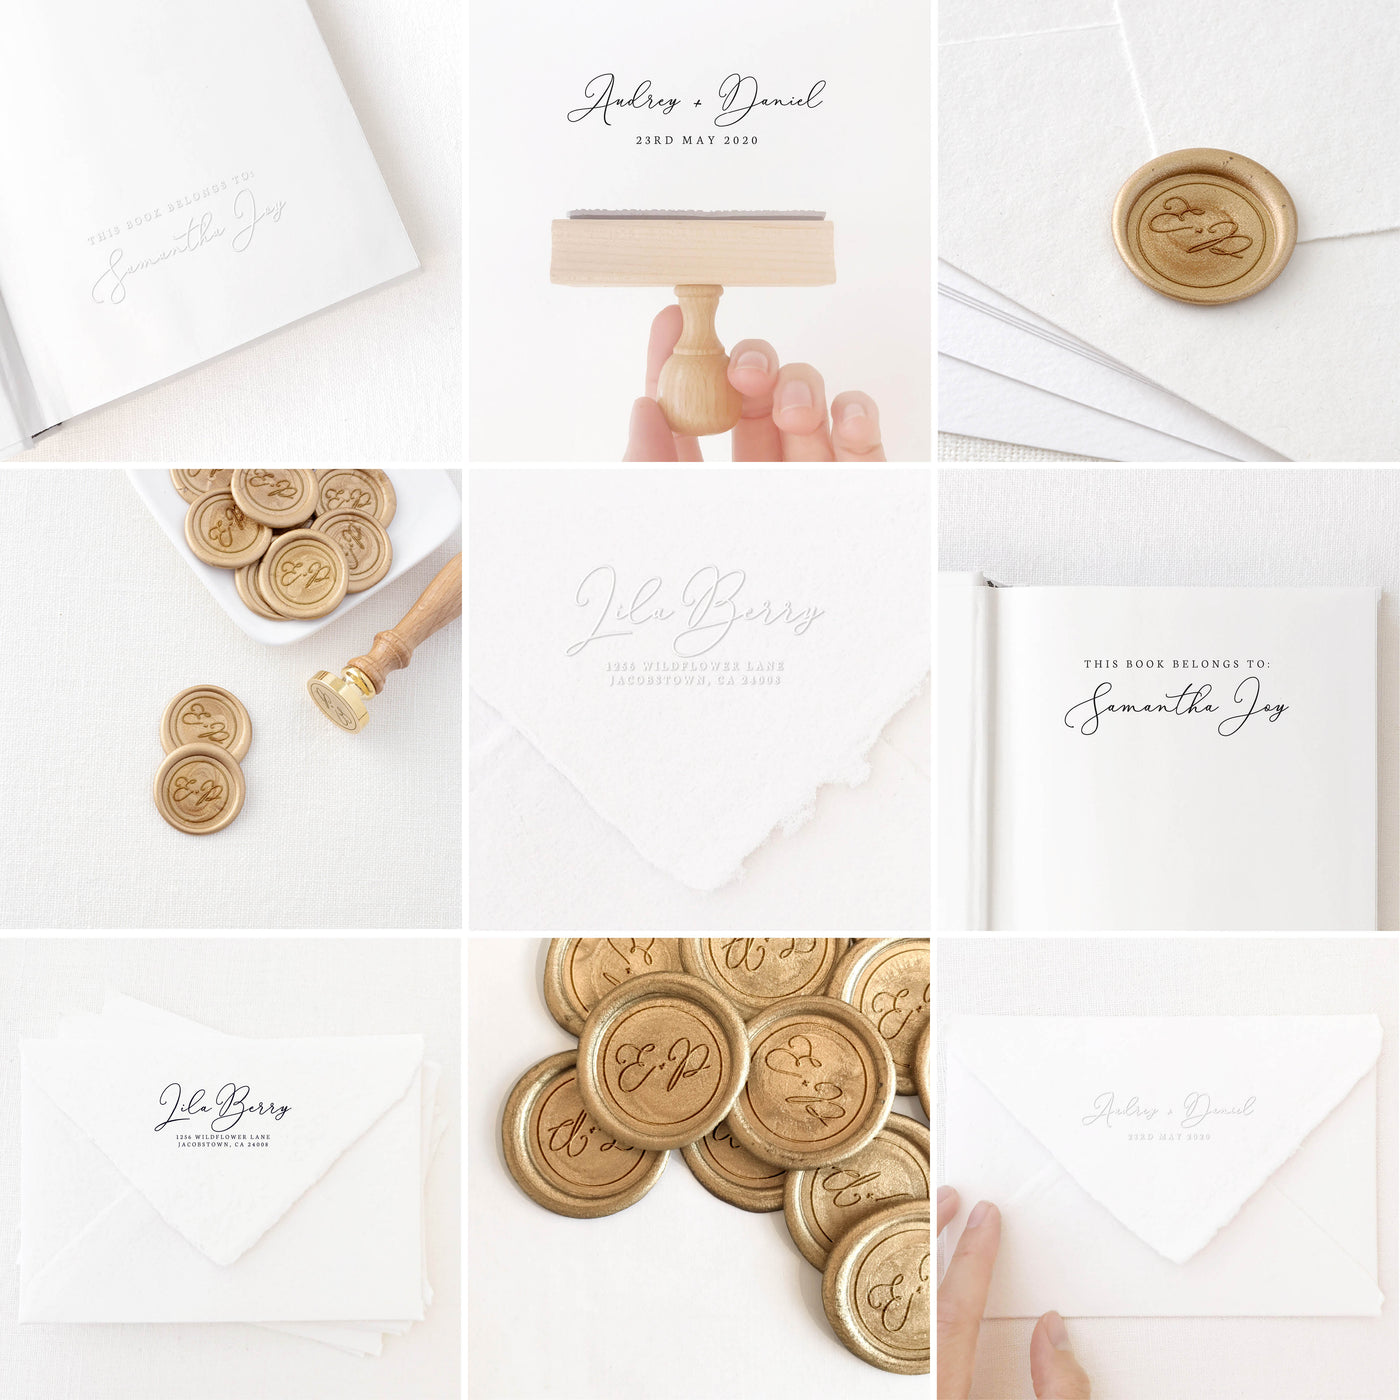 Piper Chic Modern Calligraphy Script Save The Date Rubber Stamp | Custom Rubber Stamp, Wax Seal Stickers & Embosser for Custom Luxe Embellishment Packaging & Fine Art Wedding Stationery Invitations | Heirloom Seals 